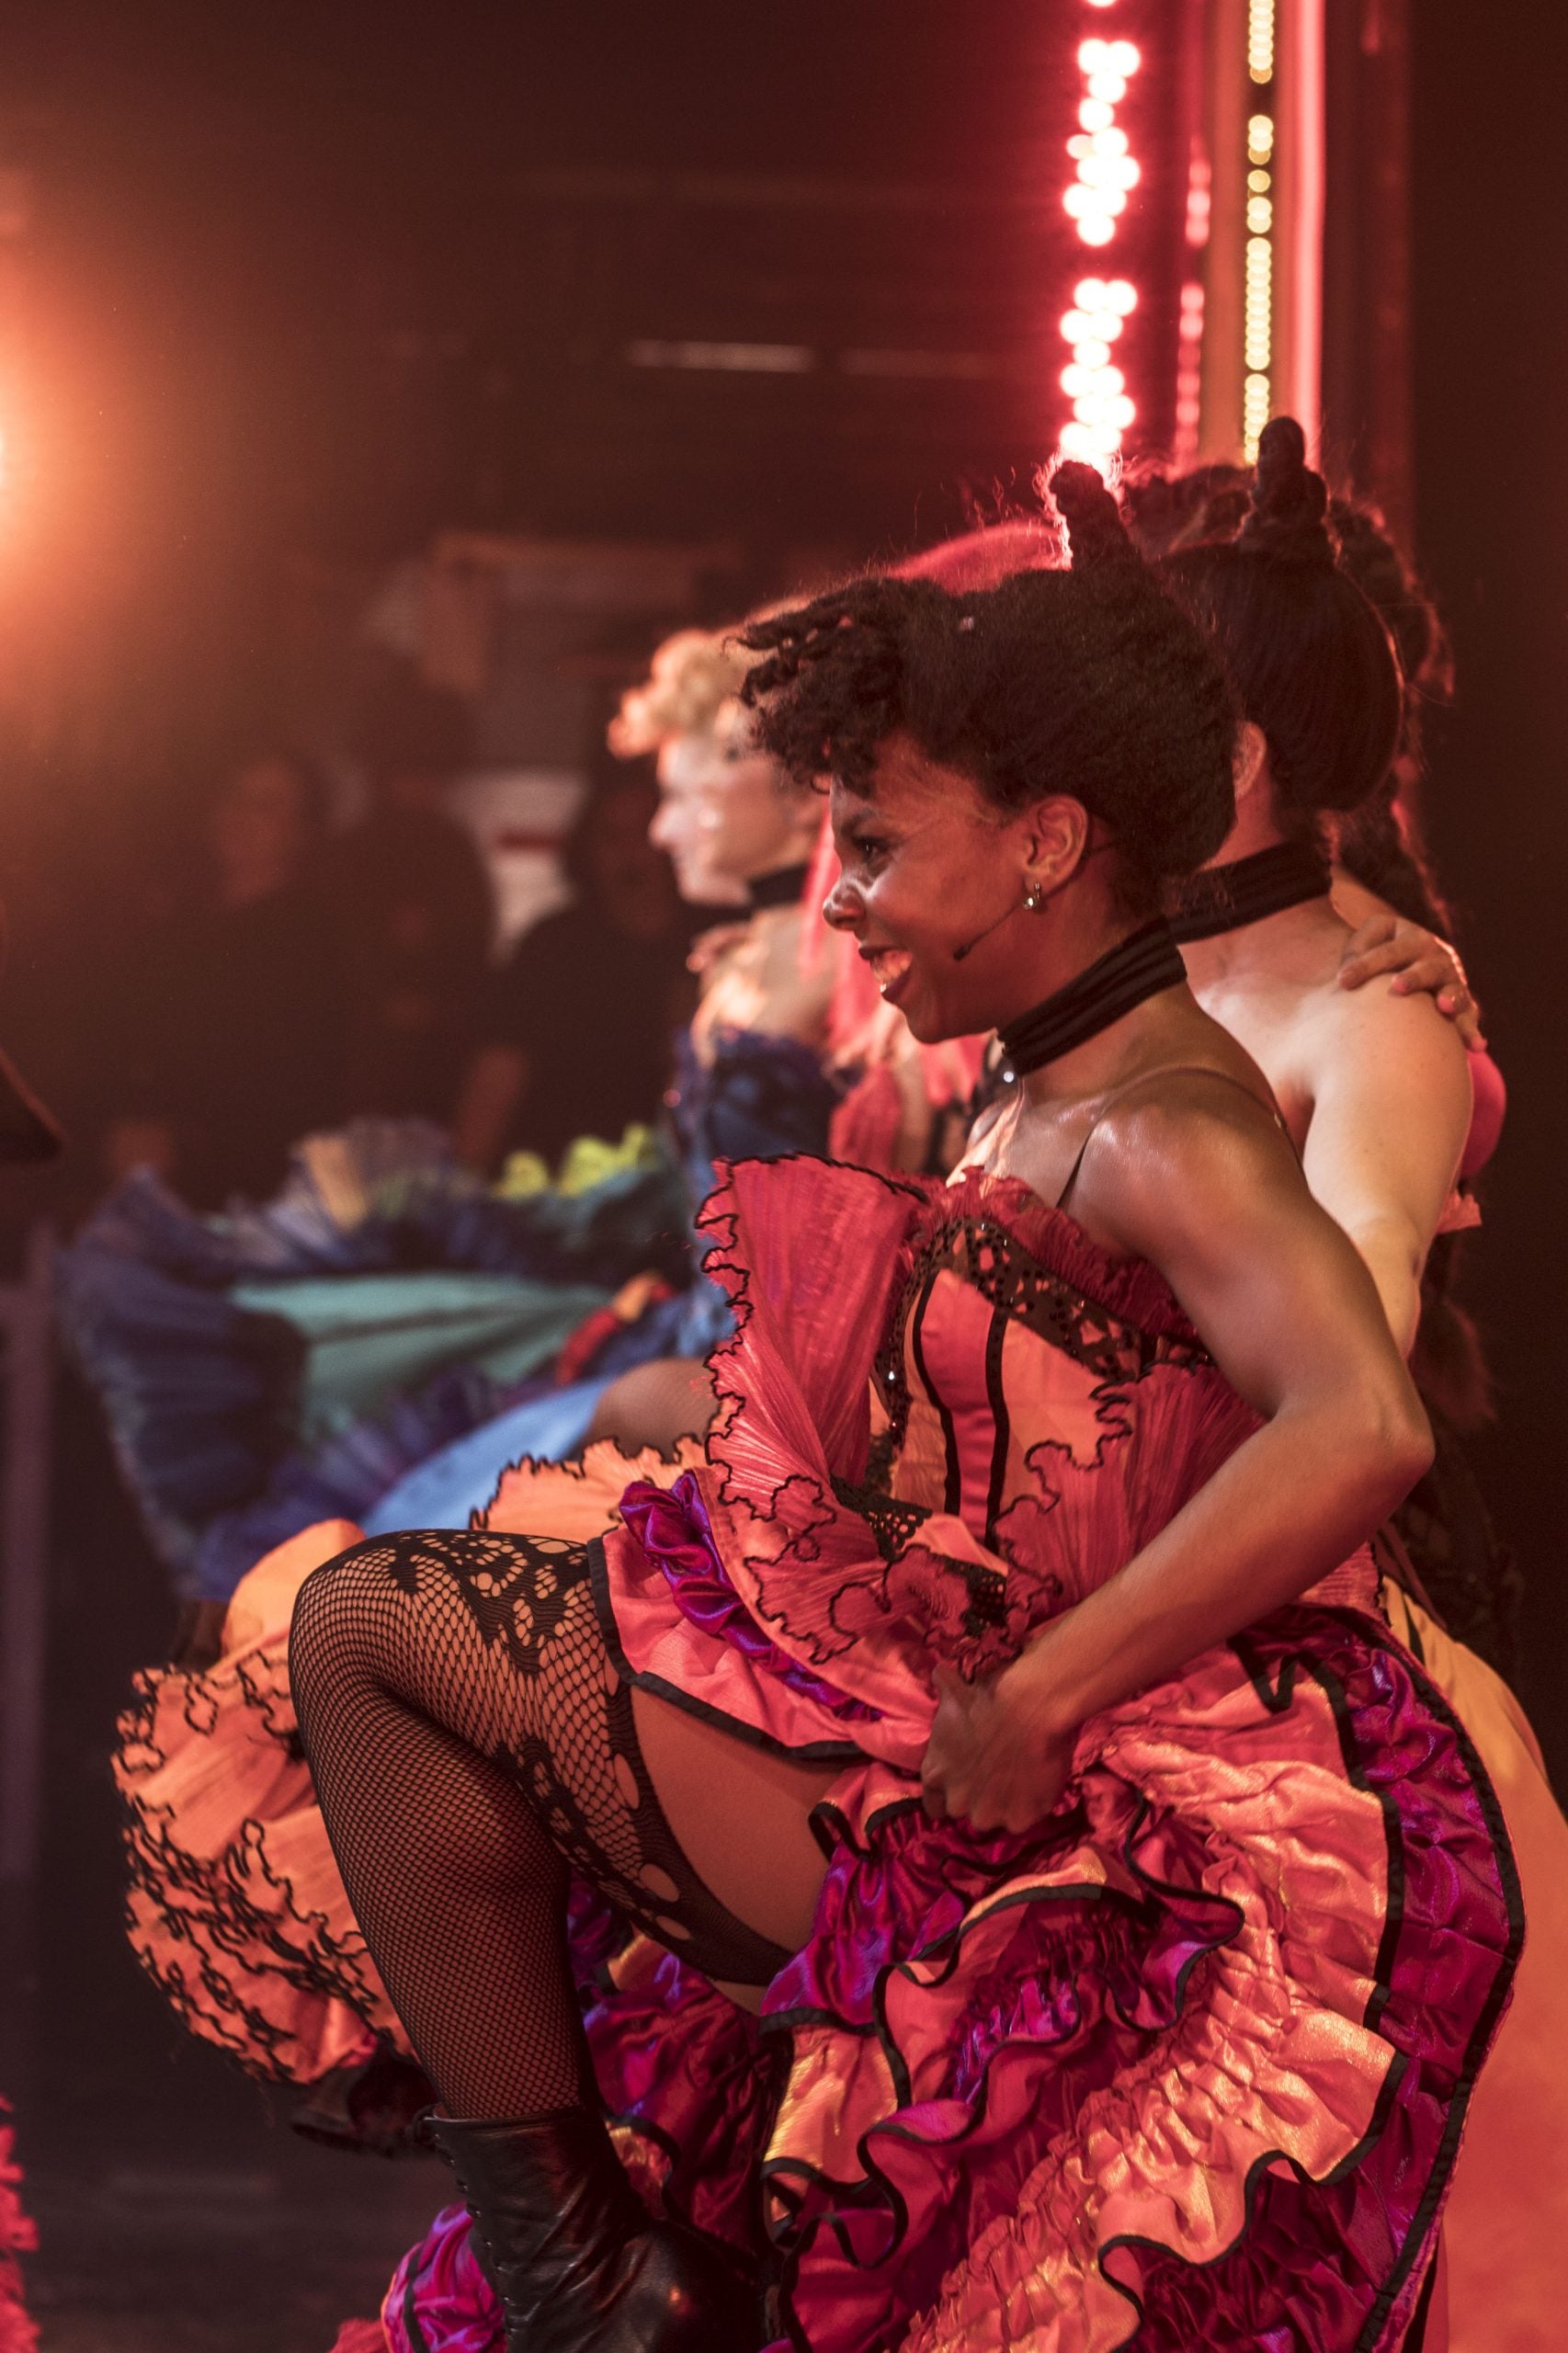 Behind the Scenes of Broadway’s ‘Moulin Rouge! The Musical’